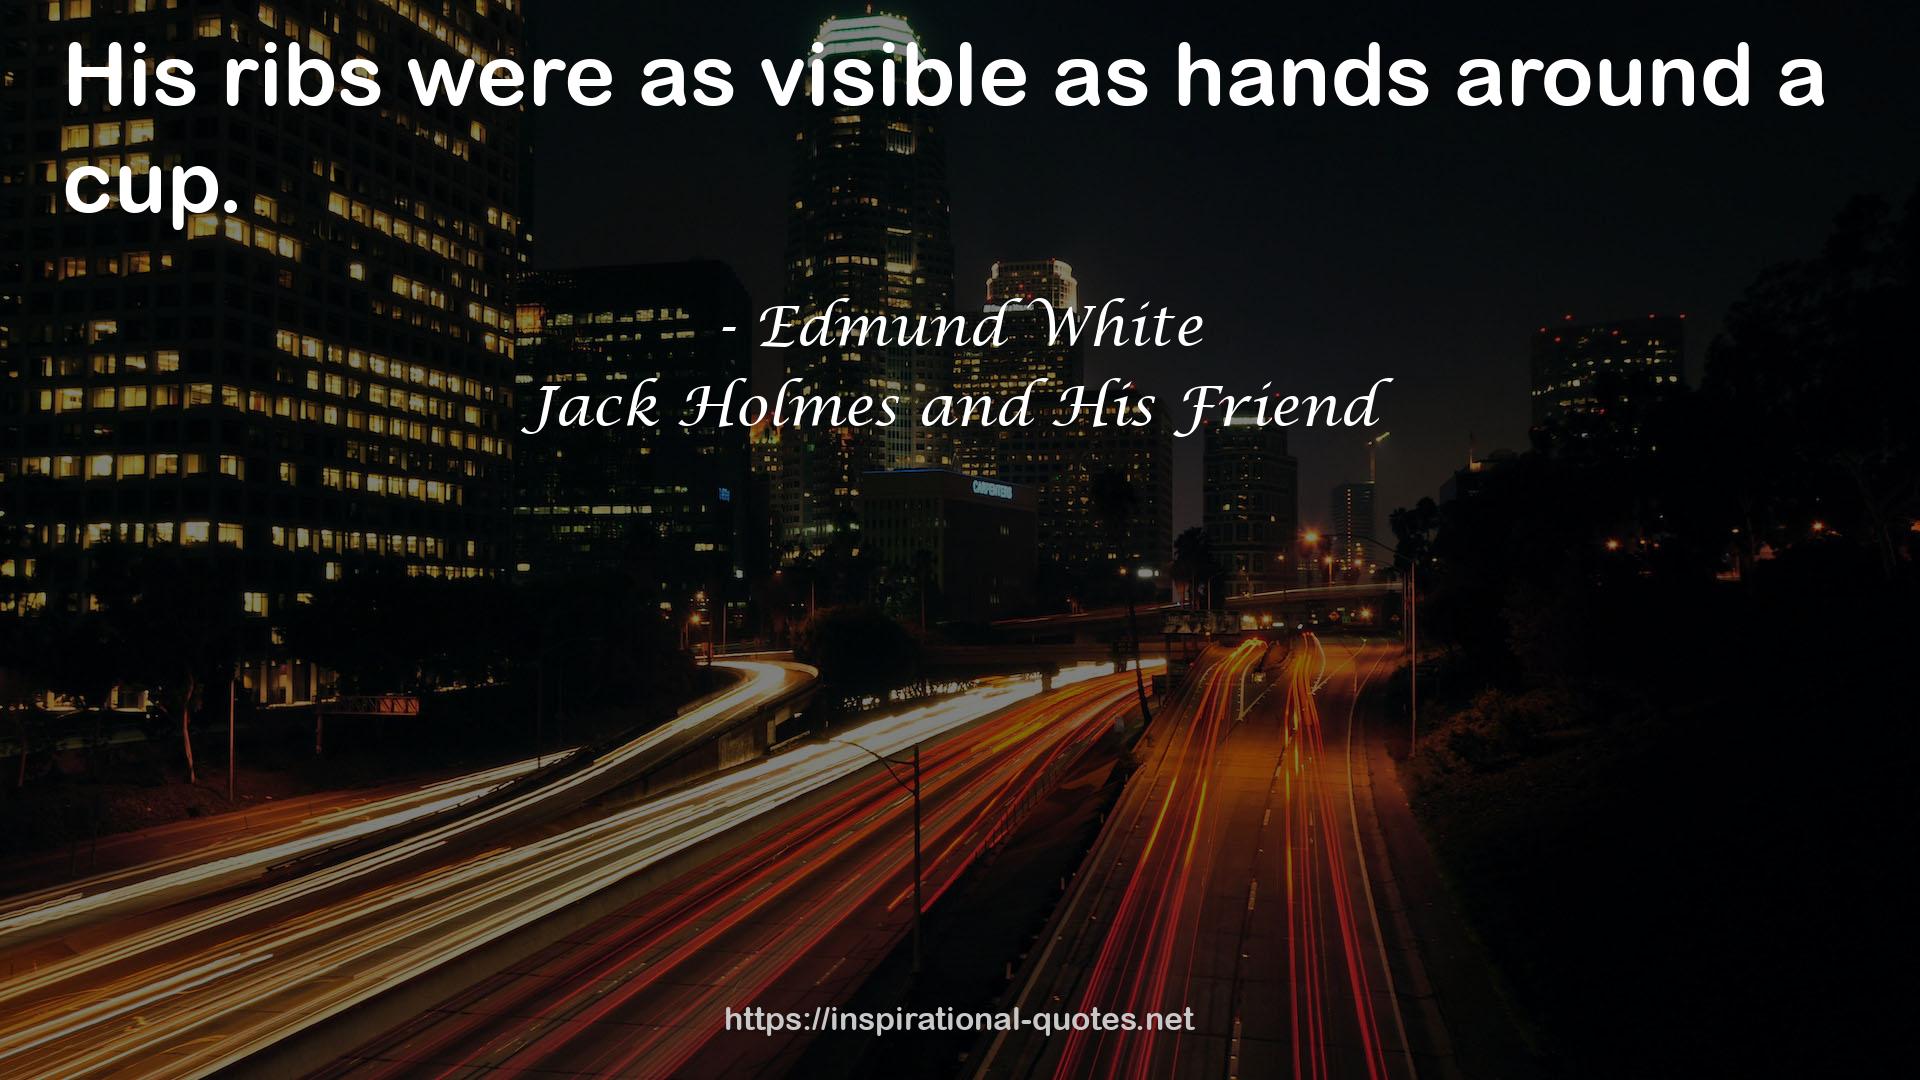 Jack Holmes and His Friend QUOTES